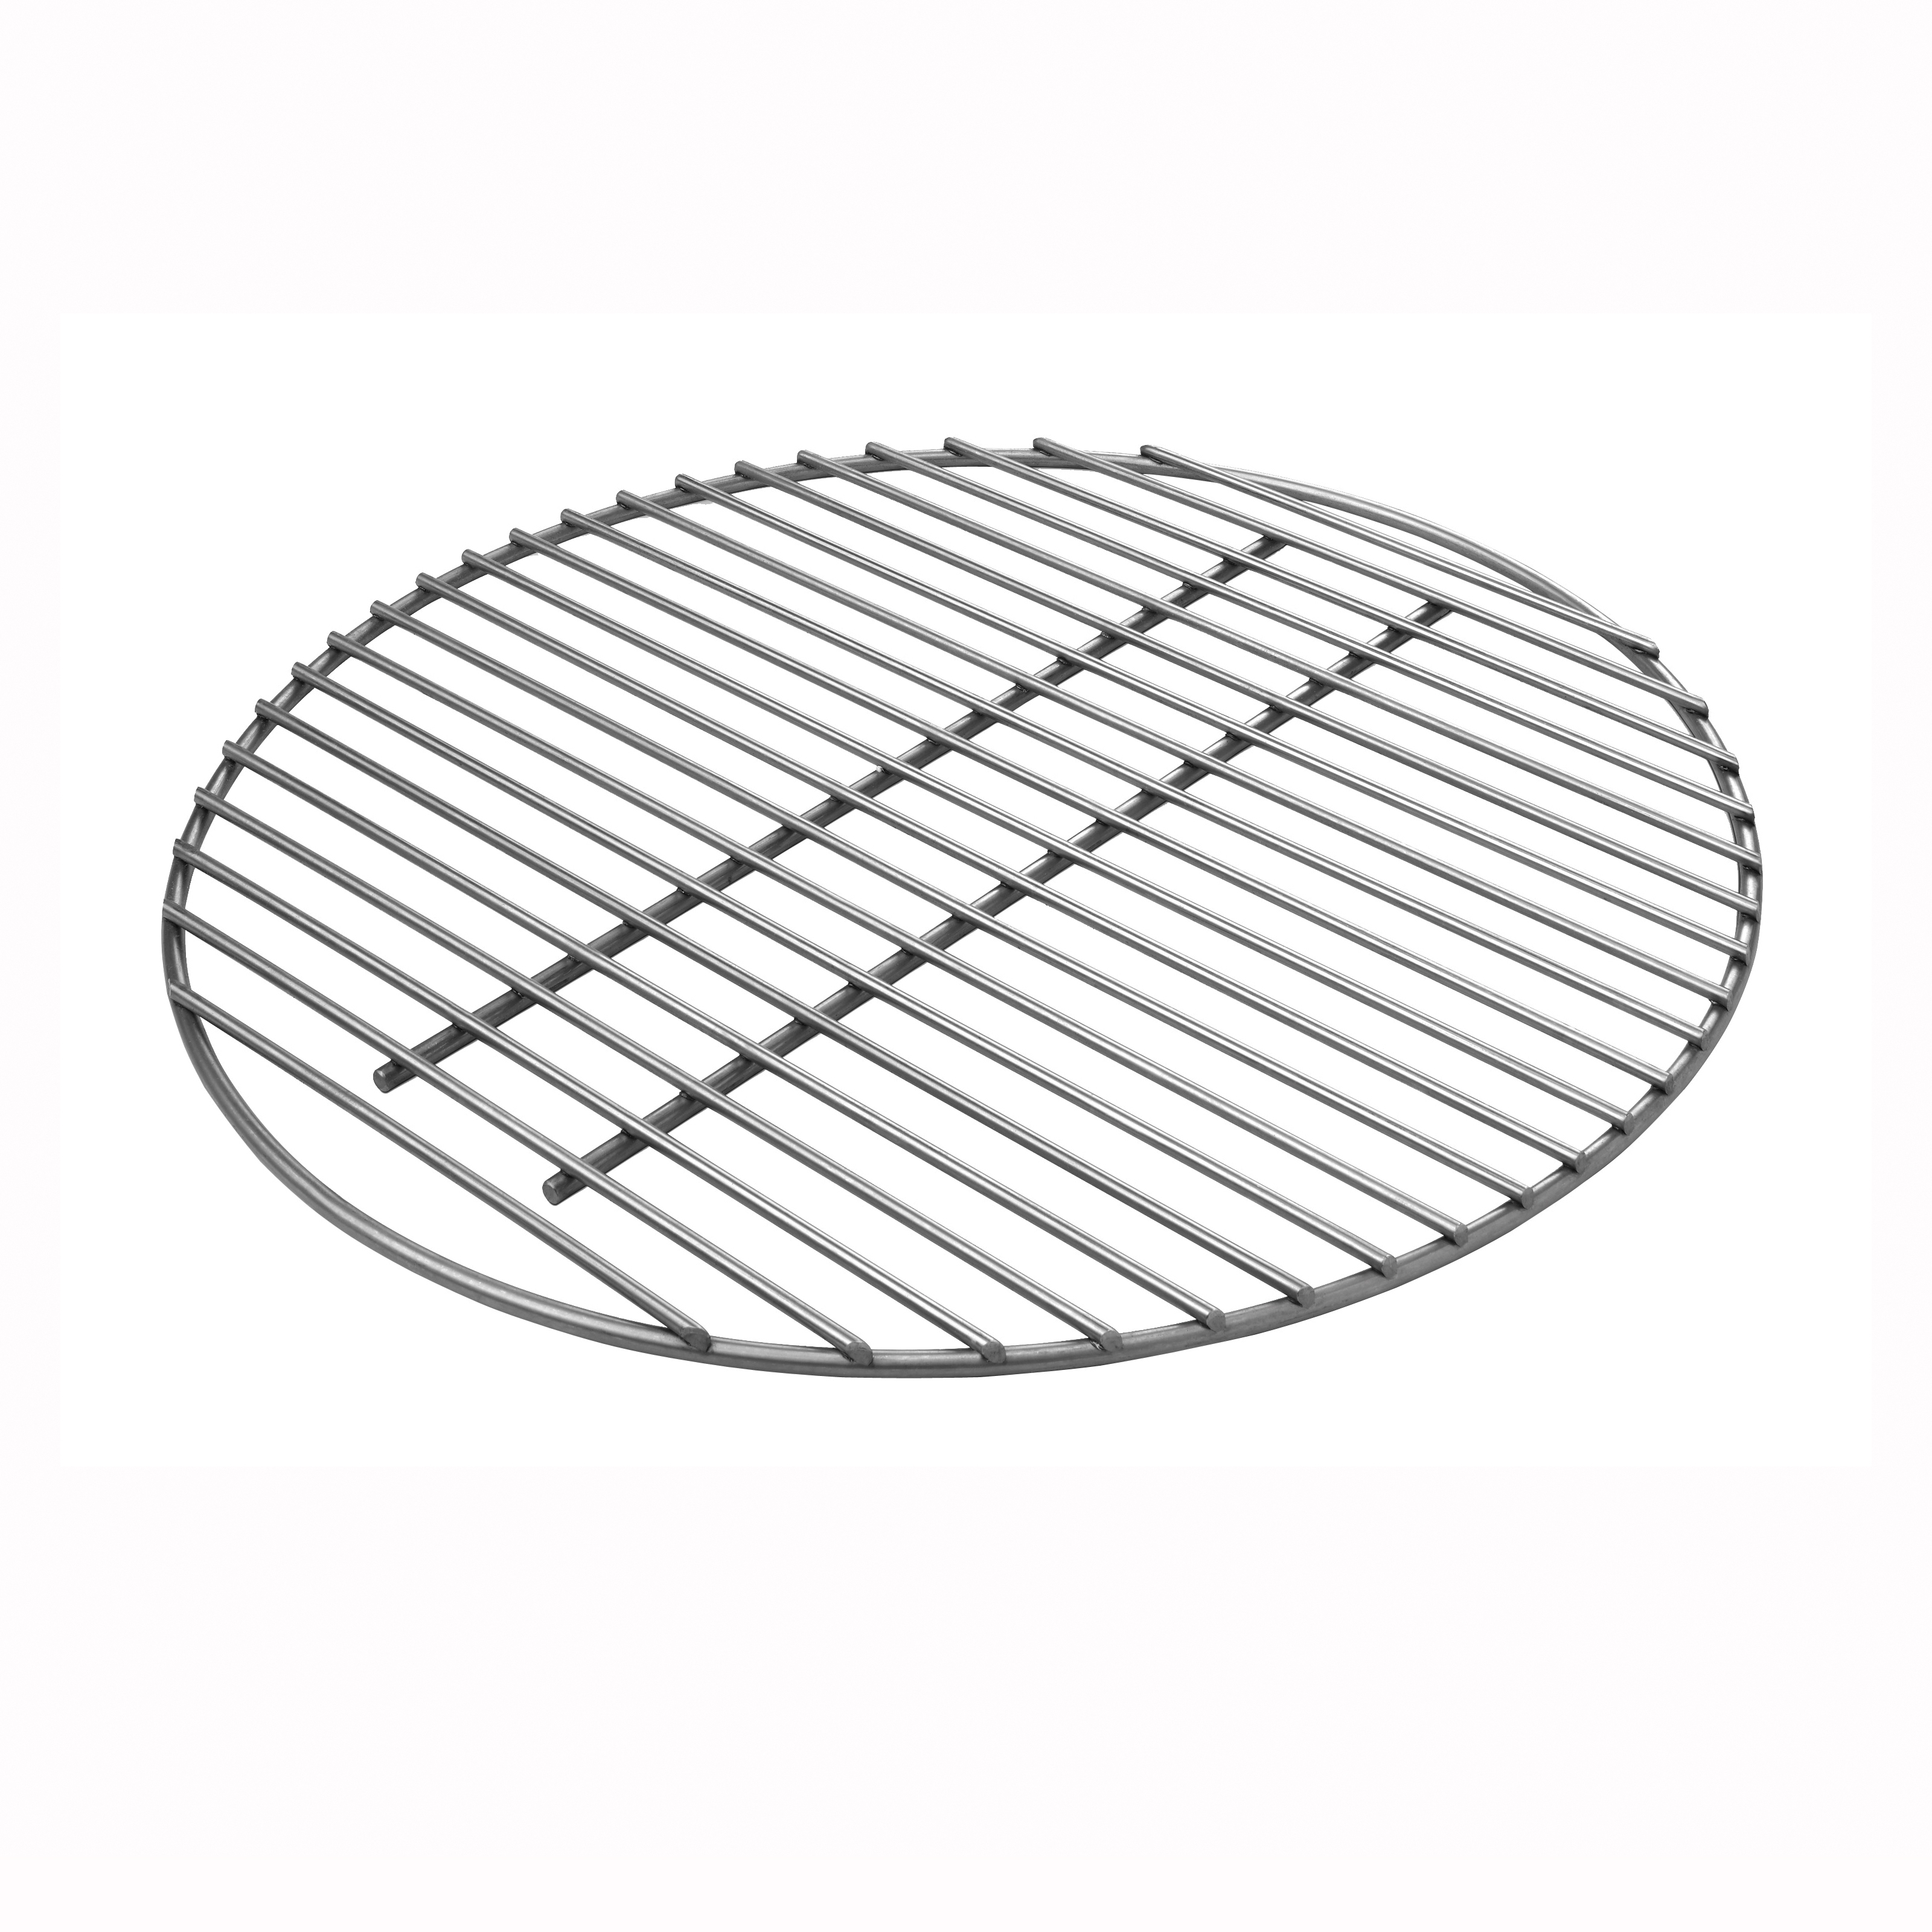 7441 Charcoal Grate, 22 in W, Steel, Plated - 1